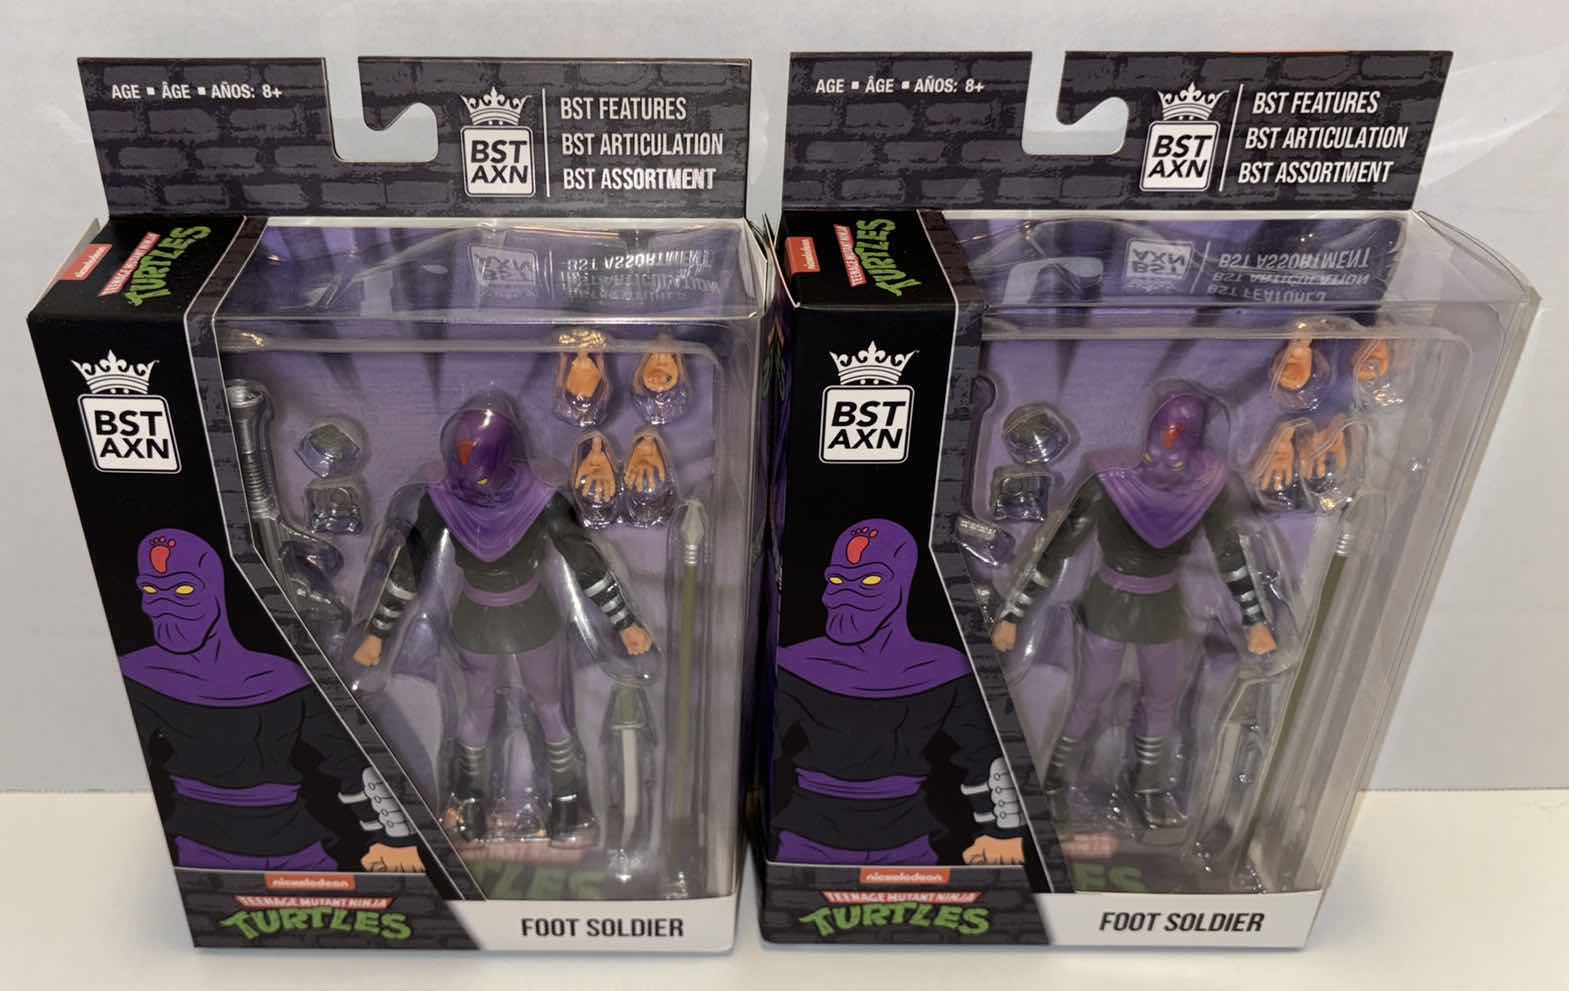 Photo 1 of NEW LOYAL SUBJECTS BST AXN TEENAGE MUTANT NINJA TURTLES ACTION FIGURE & ACCESSORIES 2-PACK, “FOOT SOLDIER”